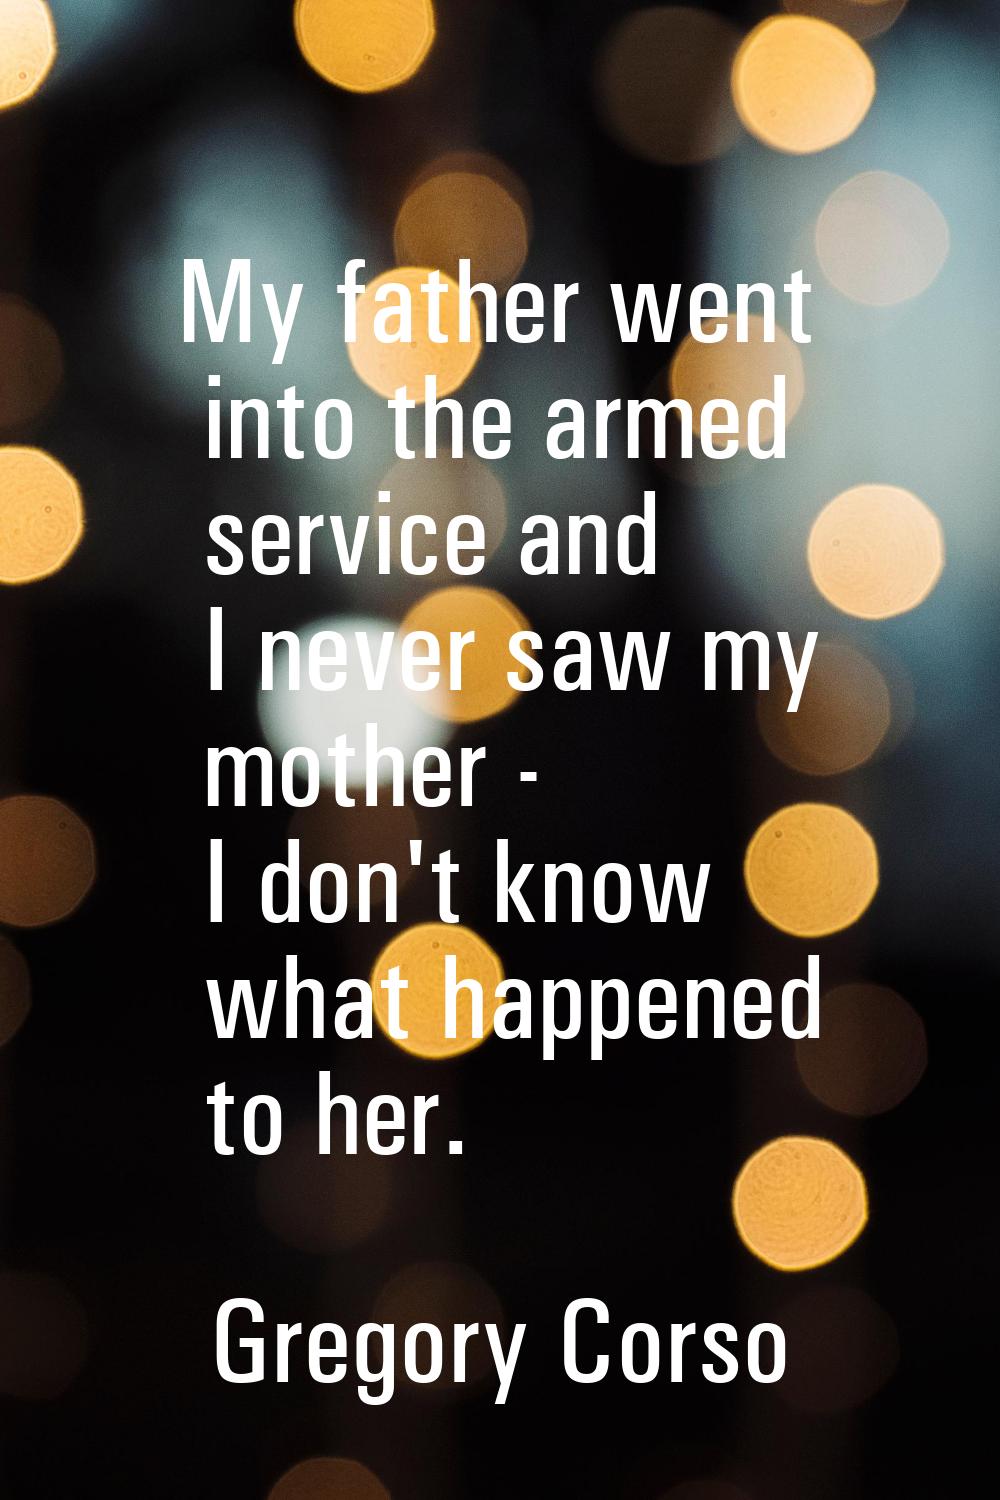 My father went into the armed service and I never saw my mother - I don't know what happened to her